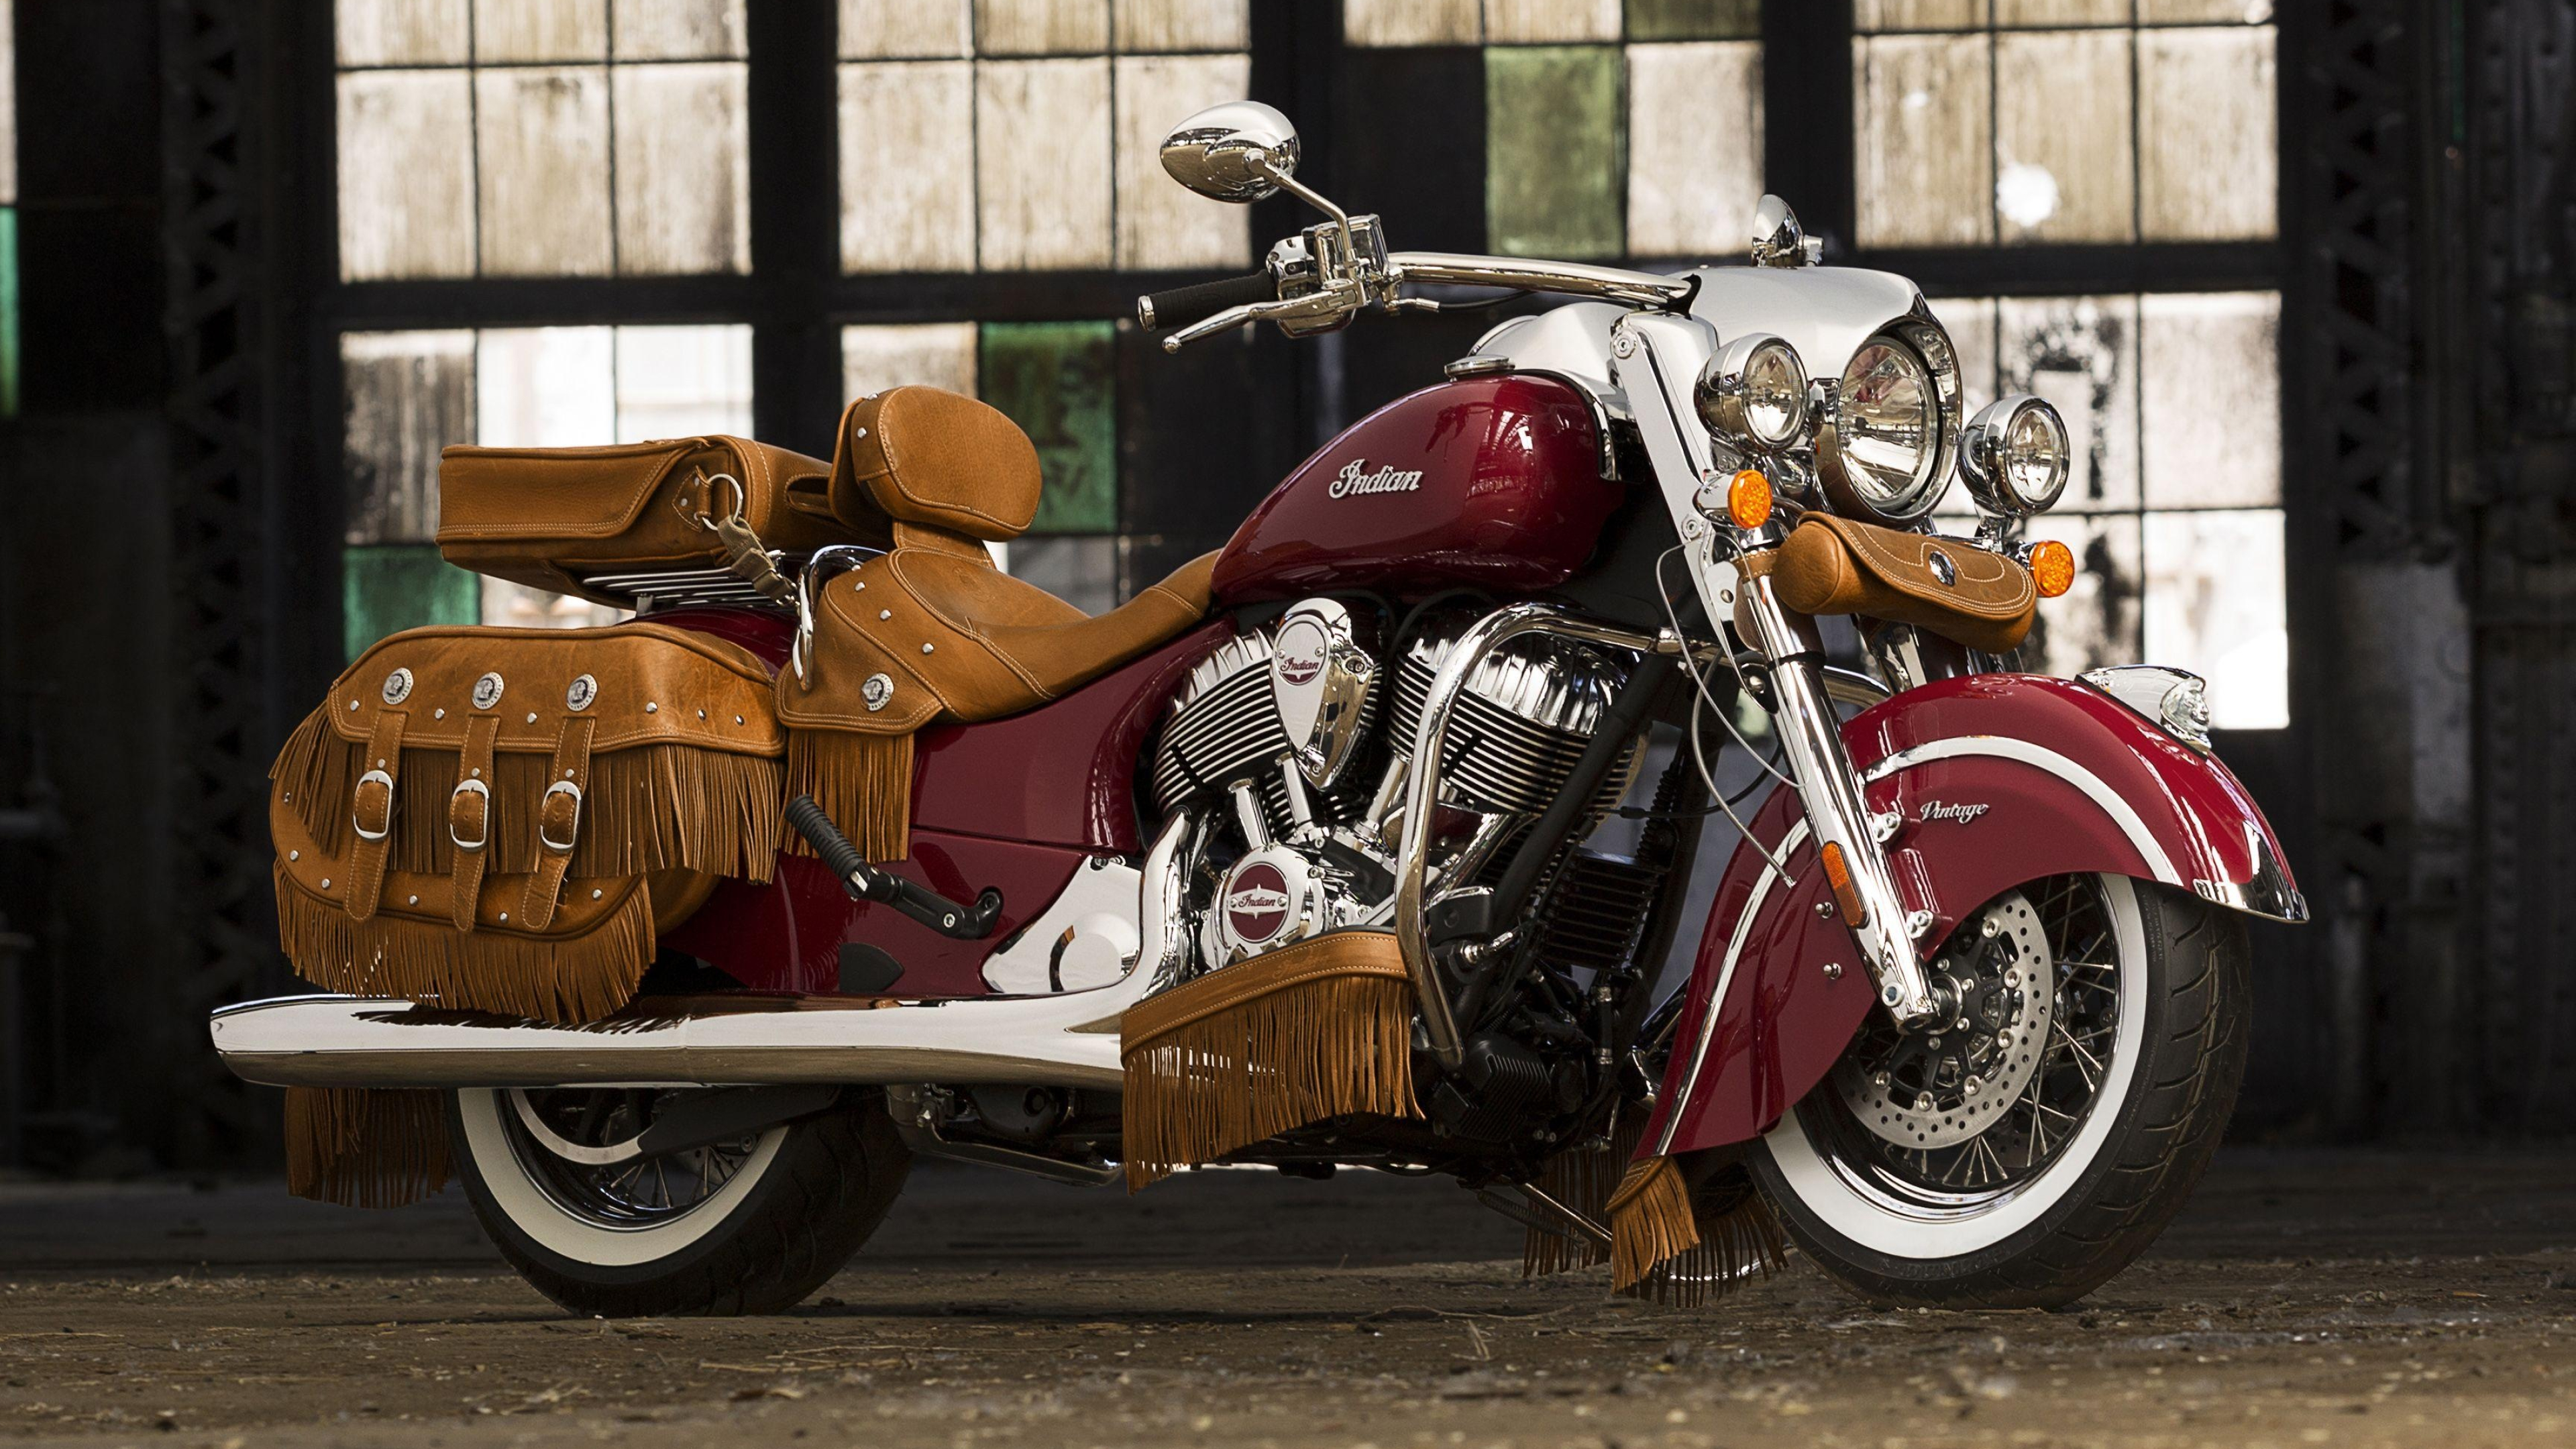 Indian Motorcycle, Auto excellence, Indian Chief, Motorcycle wallpapers, 3840x2160 4K Desktop